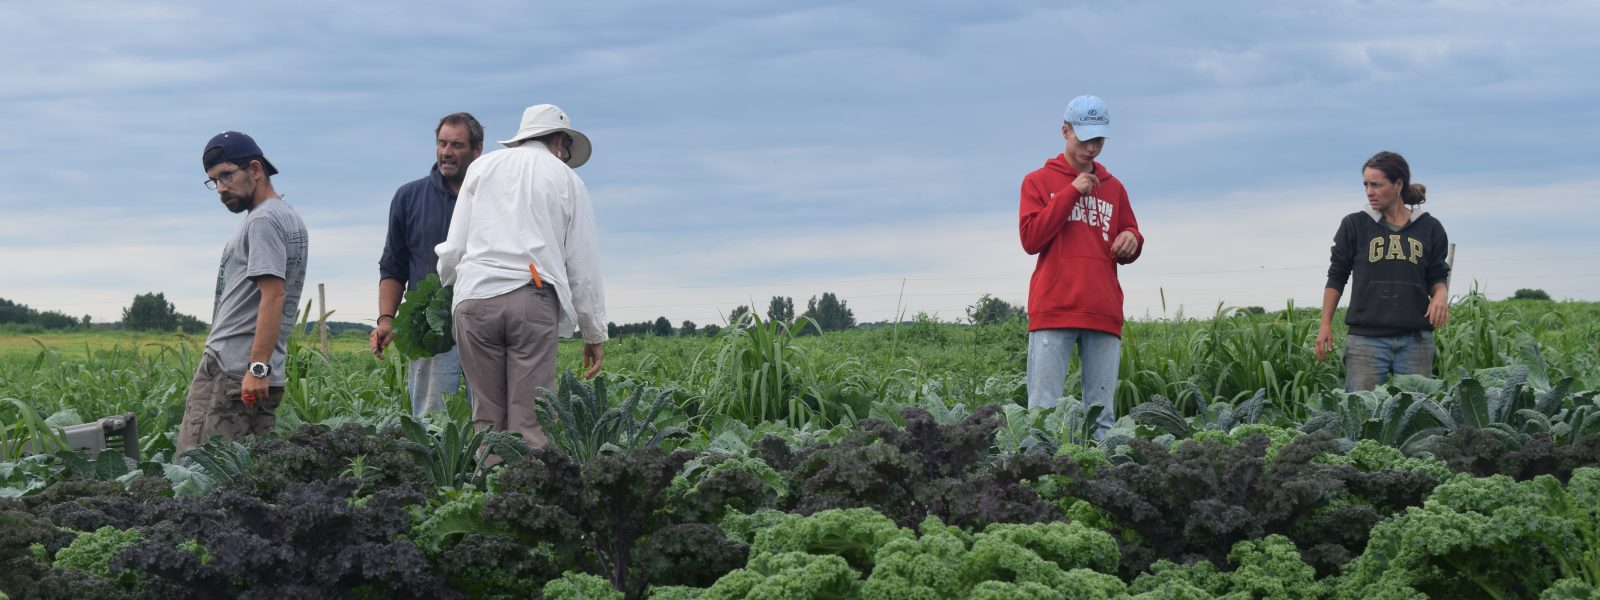 A group of people in an agricultural field